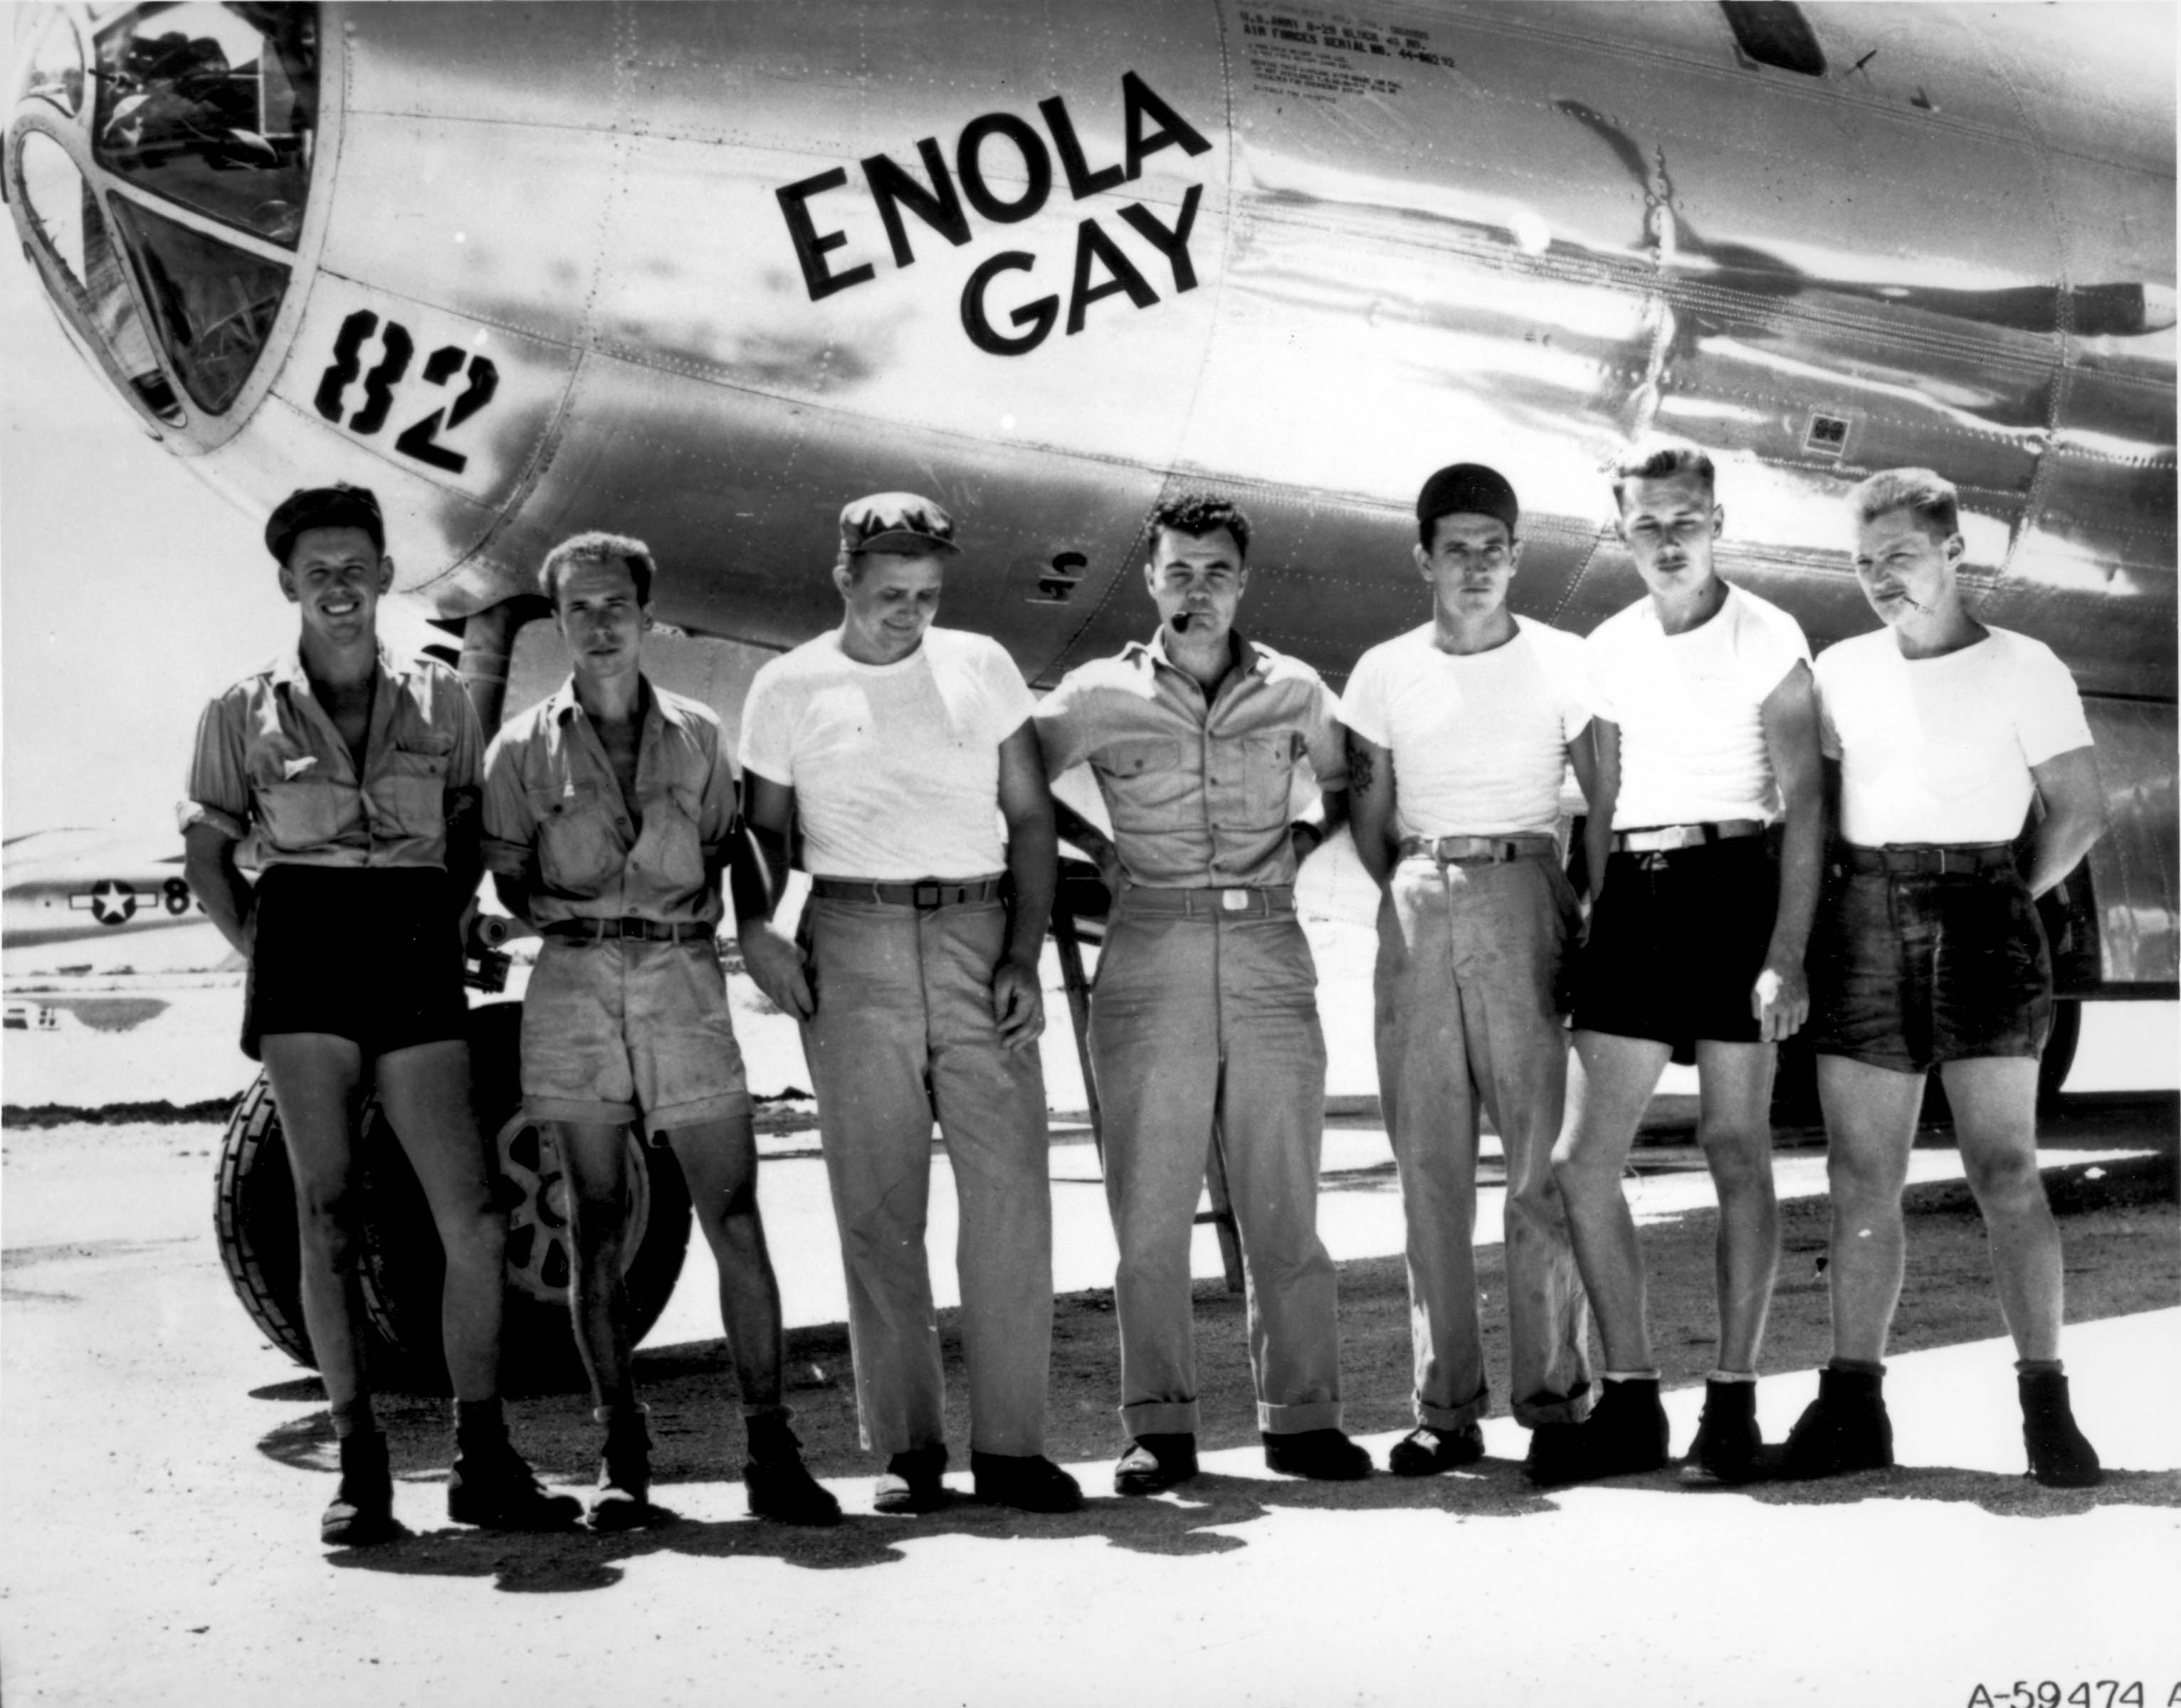 The Enola Gay's History Lives On > U.S. Department of Defense > Blog